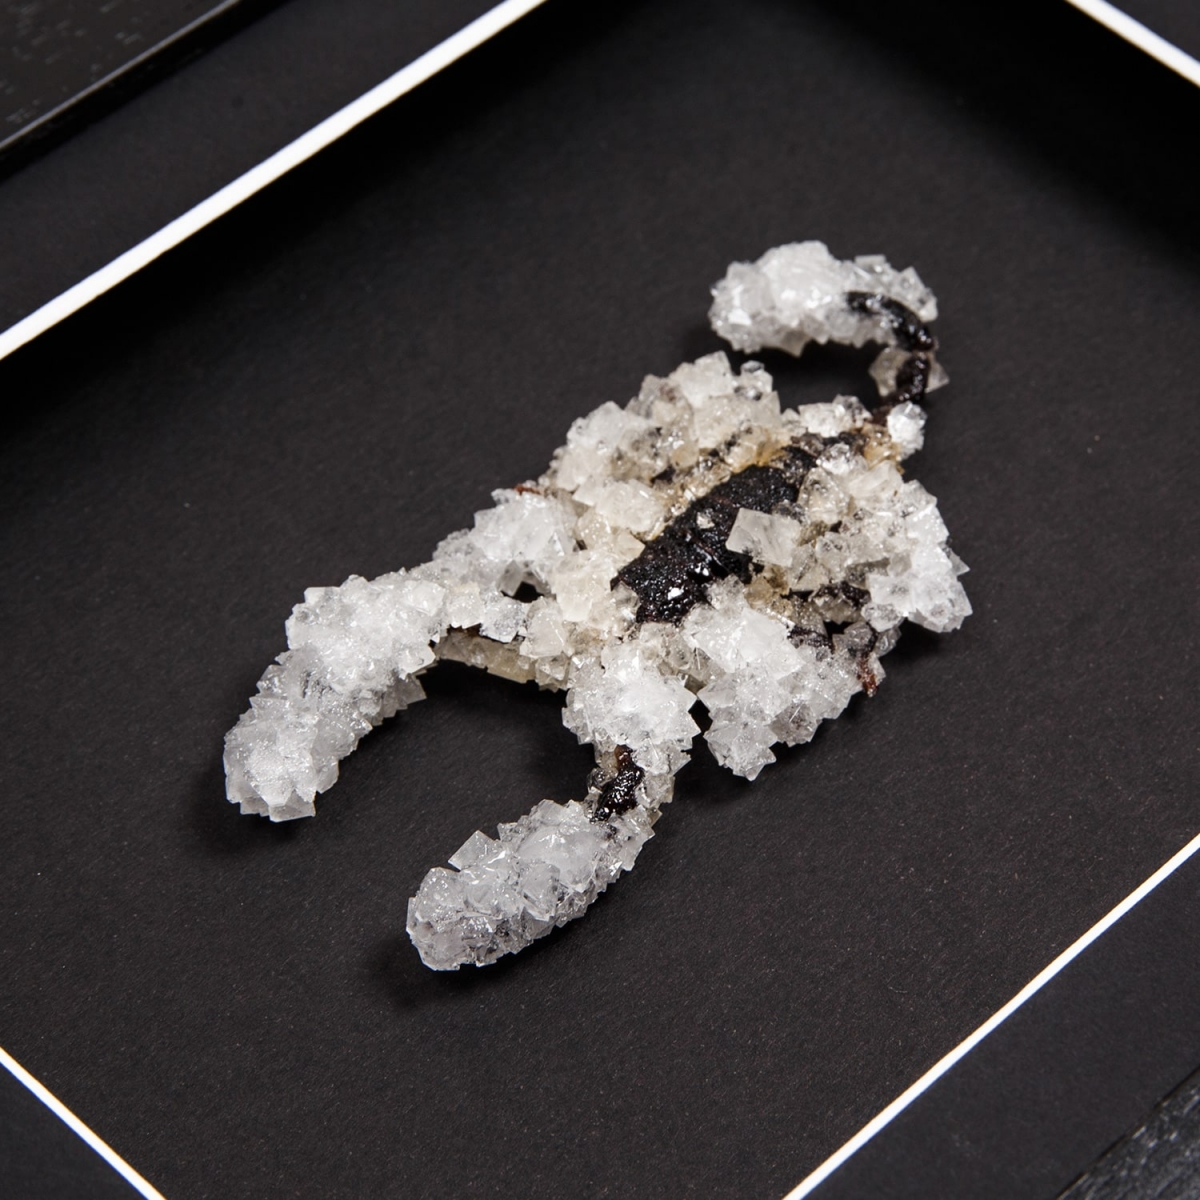 Scorpion (Heterometrus) with Clear Crystals in Box Frame